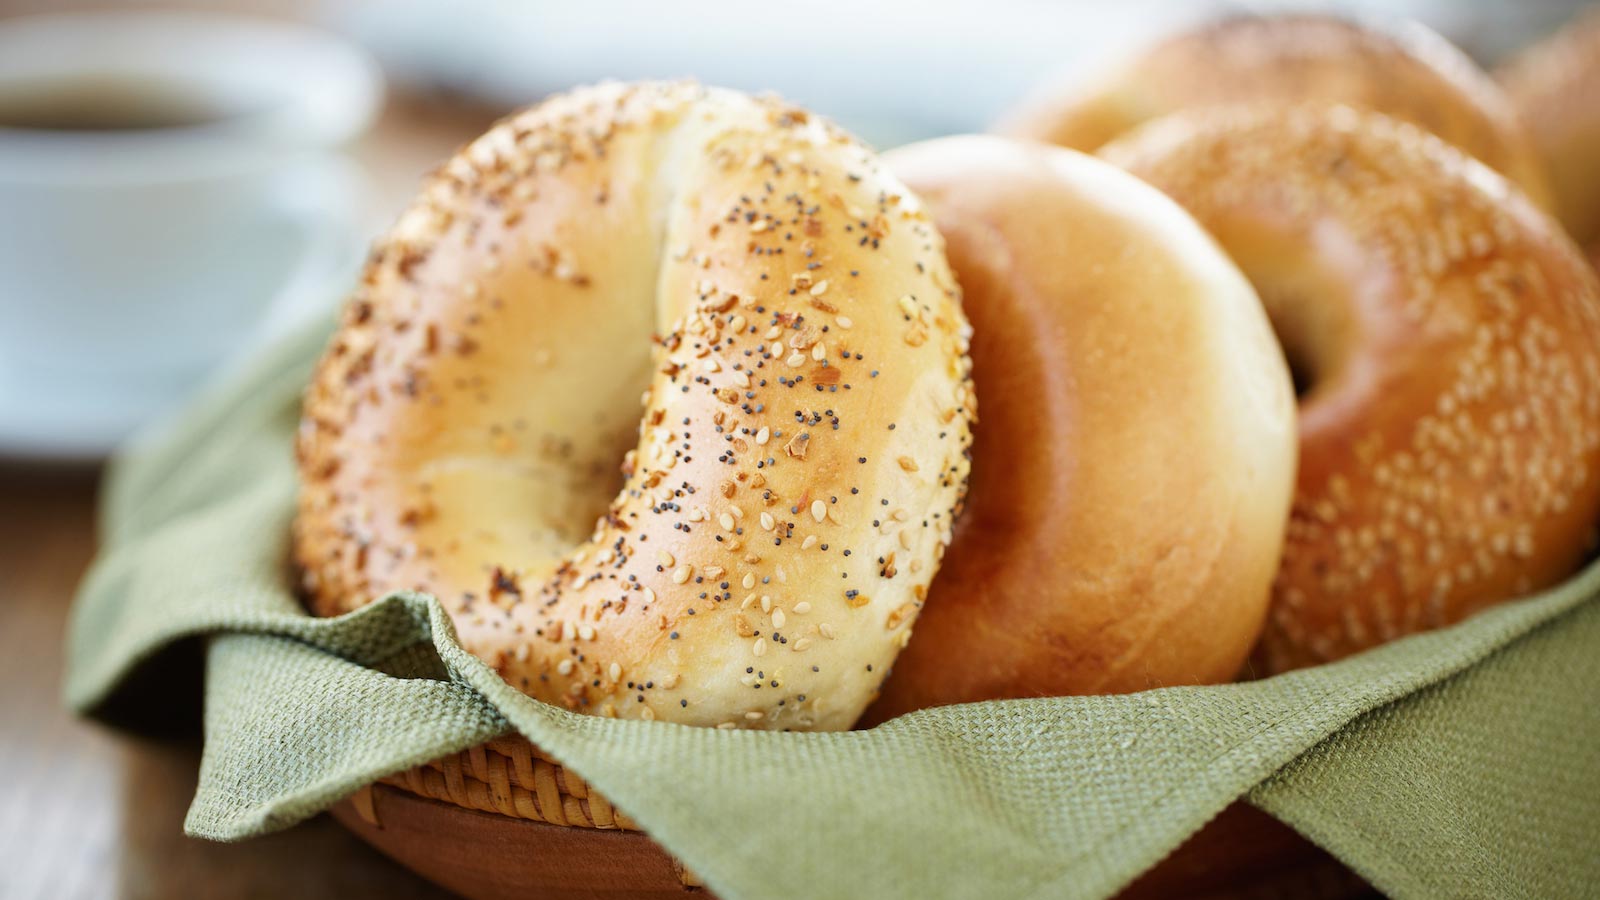 🍰 Only a Baked Good Connoisseur Will Have Eaten at Least 20/39 of These Foods Bagels